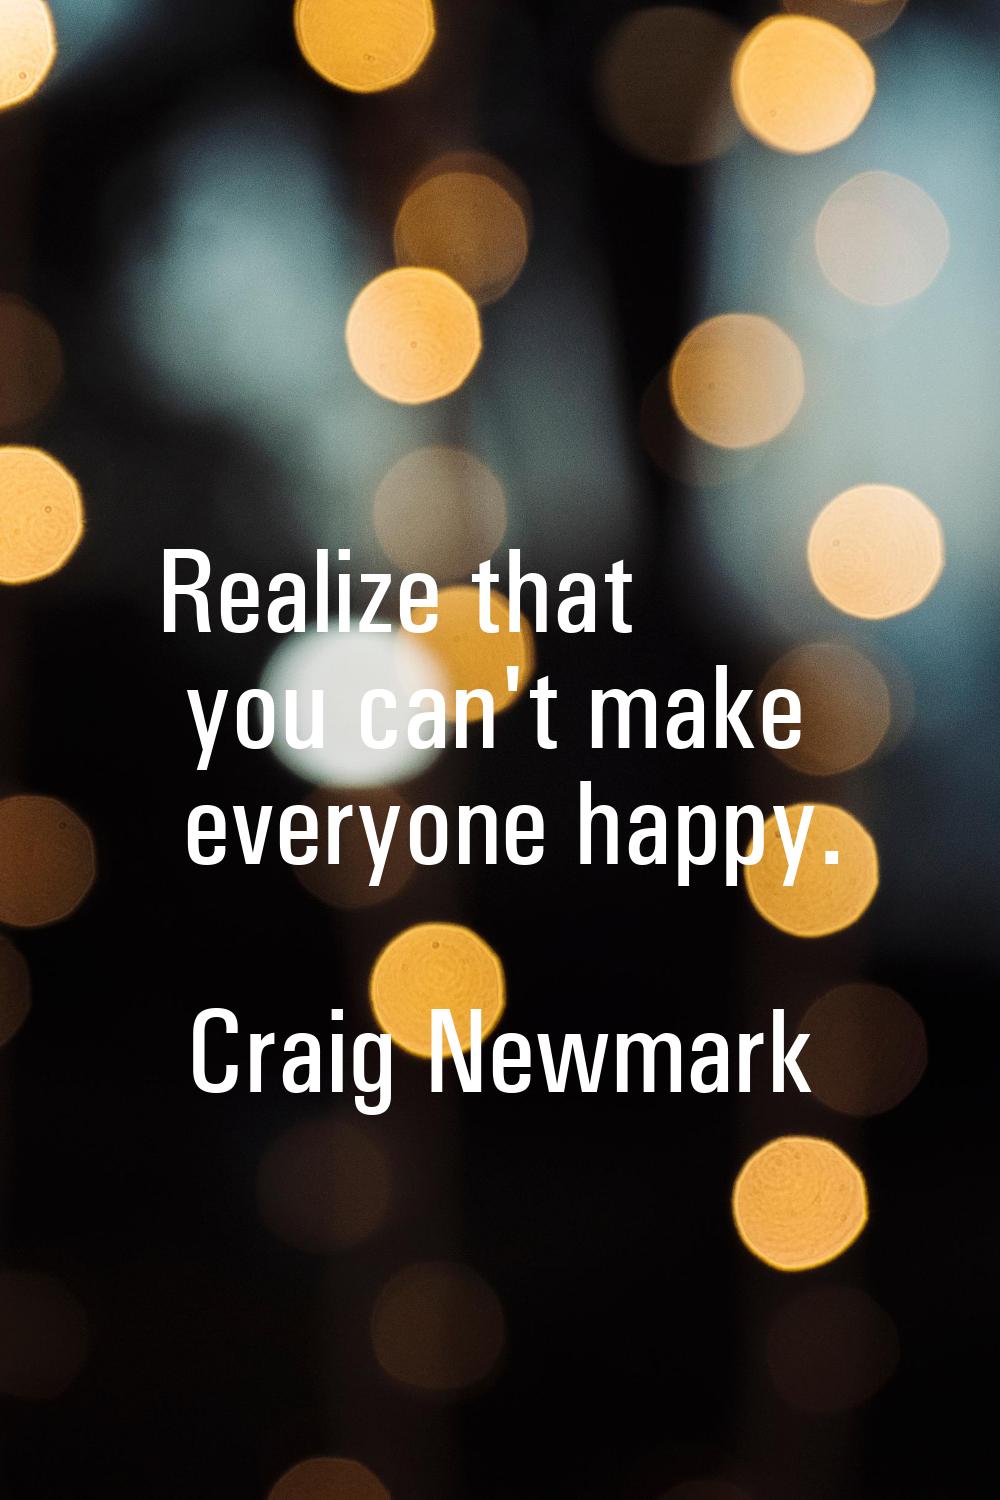 Realize that you can't make everyone happy.